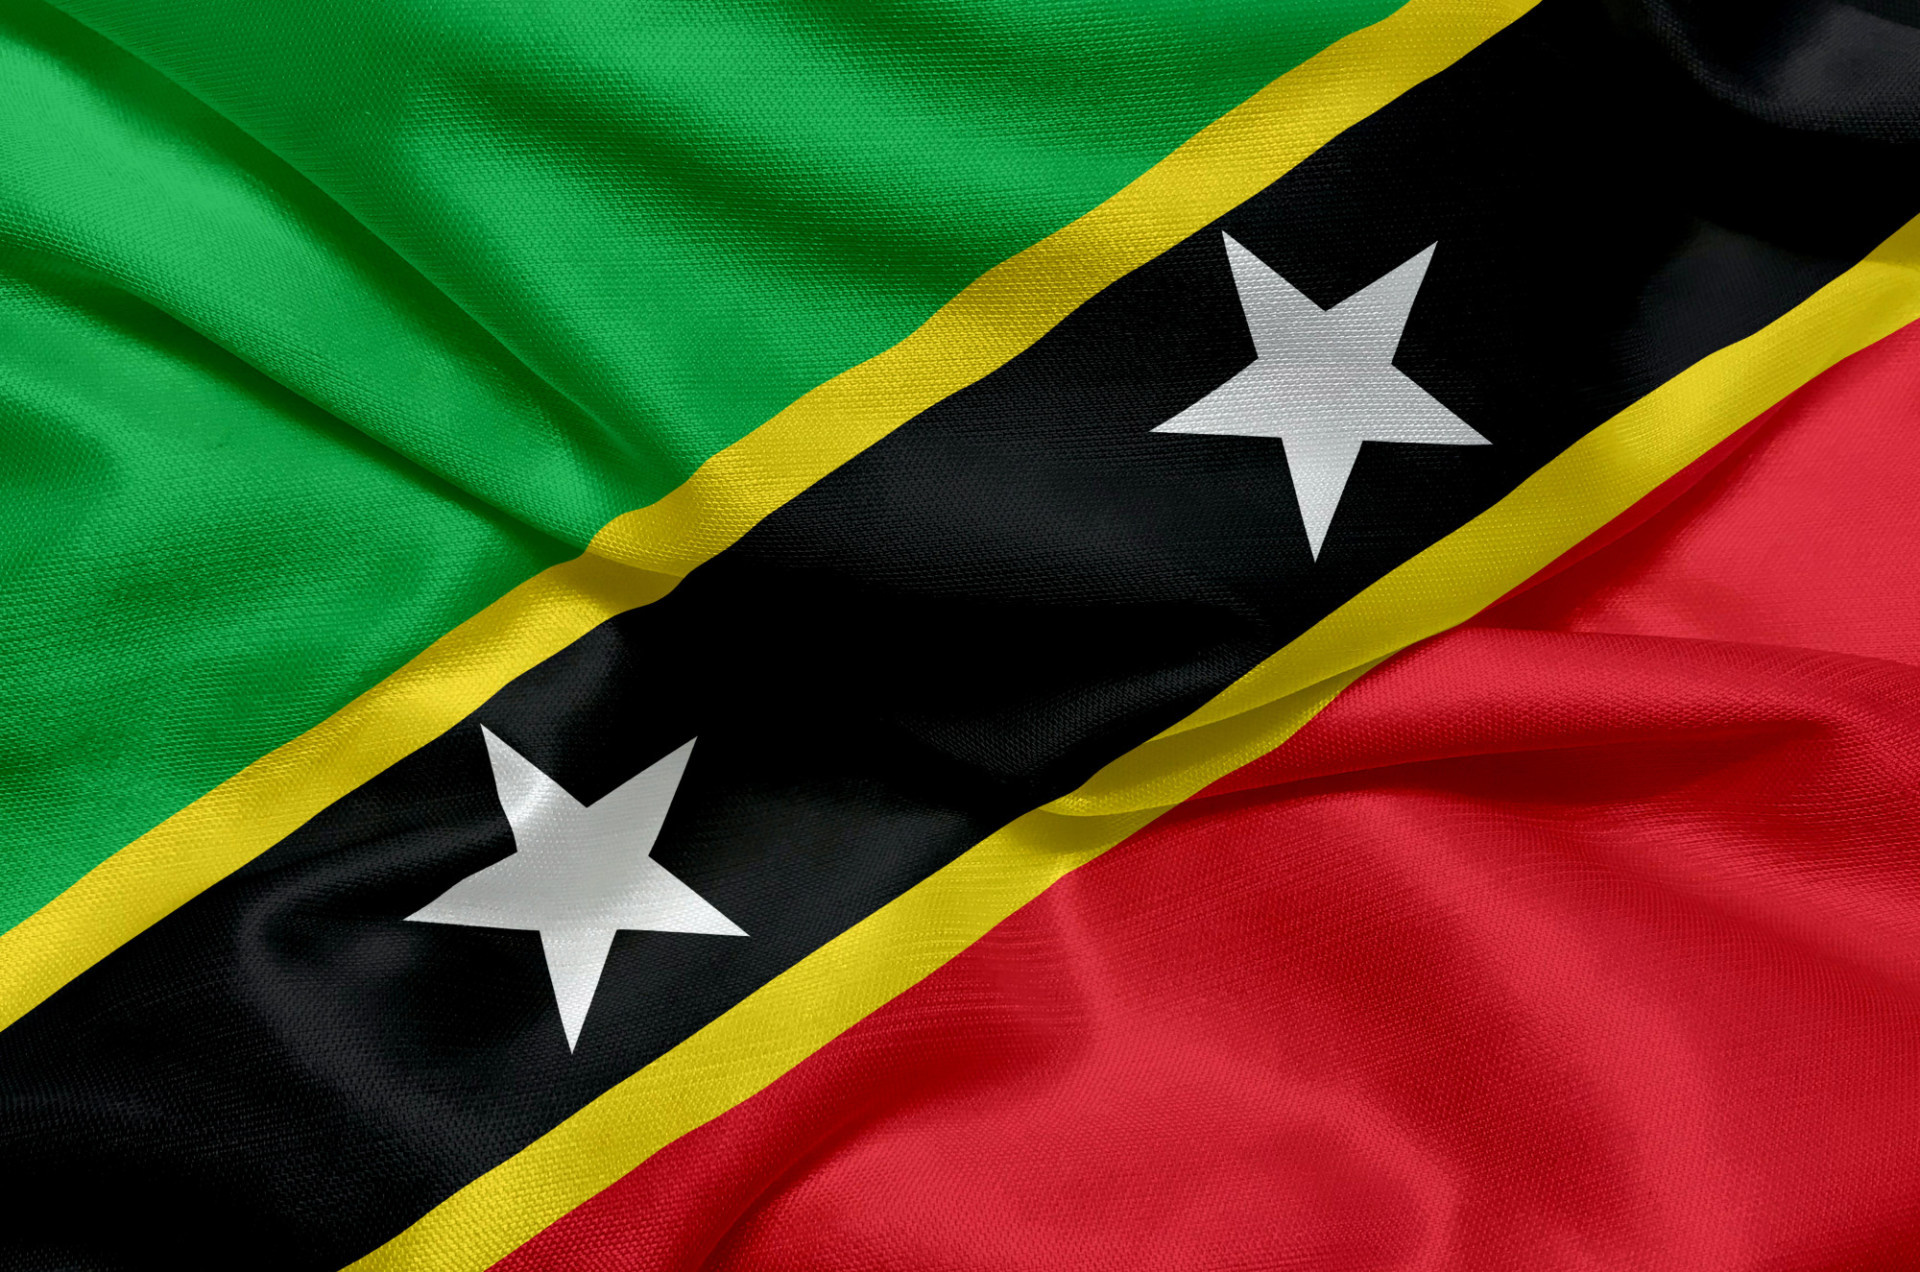 Saint Kitts and Nevis: The national motto is "Country Above Self", The Lesser Antilles, Flag of islands. 1920x1280 HD Wallpaper.